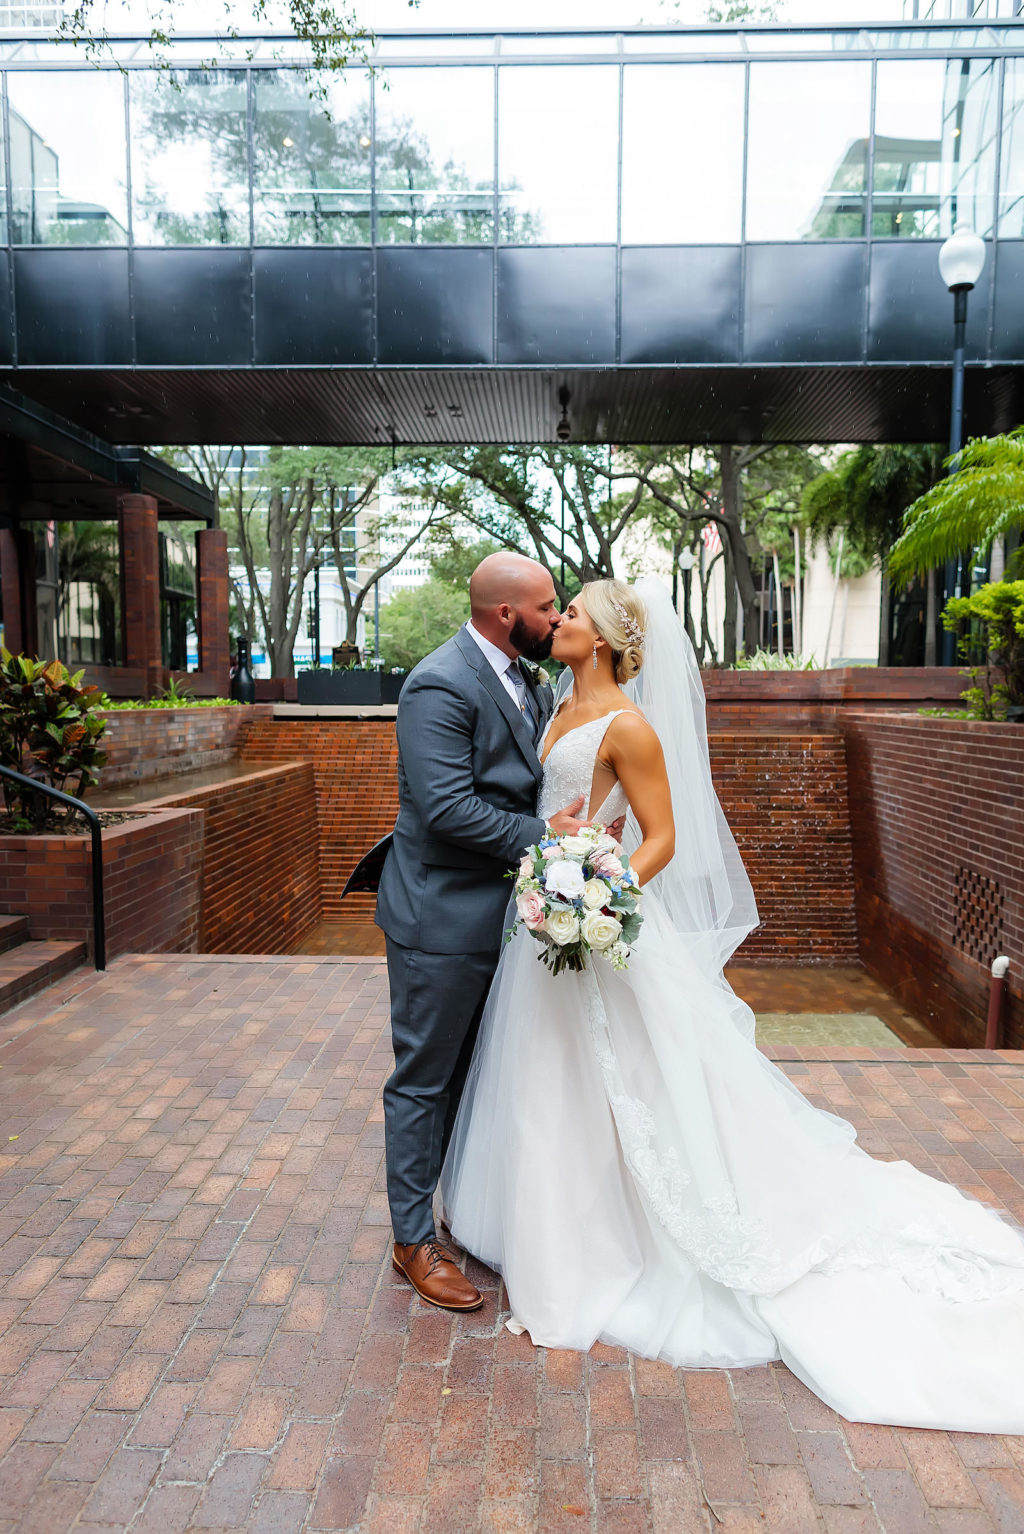 Outdoor Bride and Groom Portrait at Tampa Wedding Venue Hilton Tampa Downtown | Long Cathedral Veil | A Line Ballgown Tulle V Neck Lace Wedding Dress by Hayley Paige Designer | Groom Wearing Classic Charcoal Grey Suit